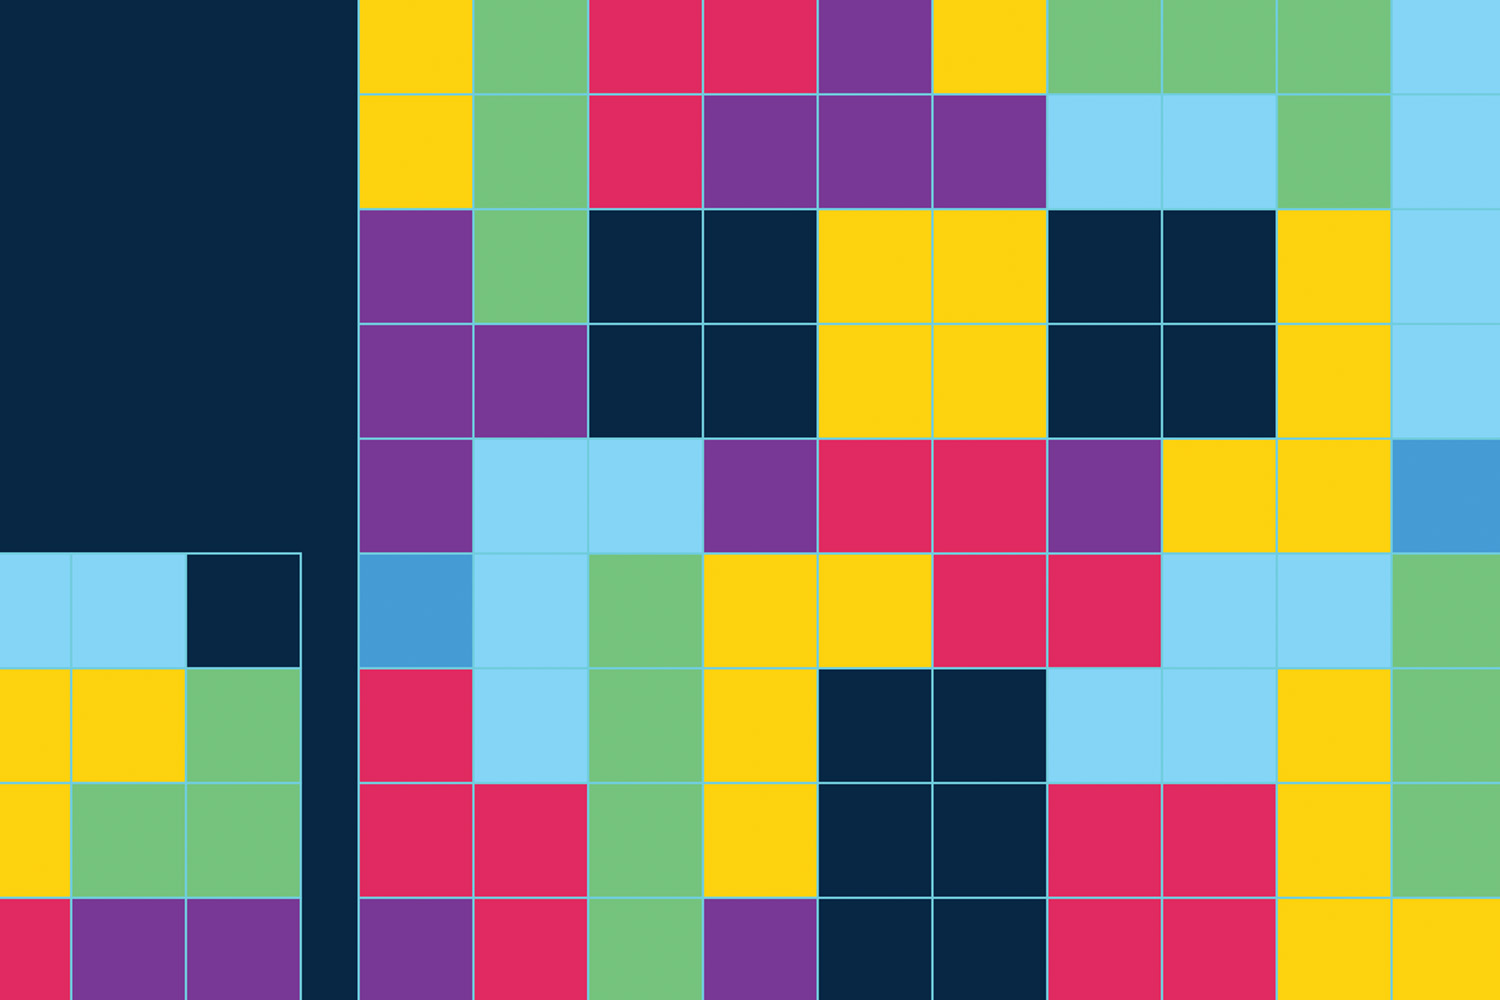 An illustration of blocks resembling a game of Tetris. It represents the concept of retention.